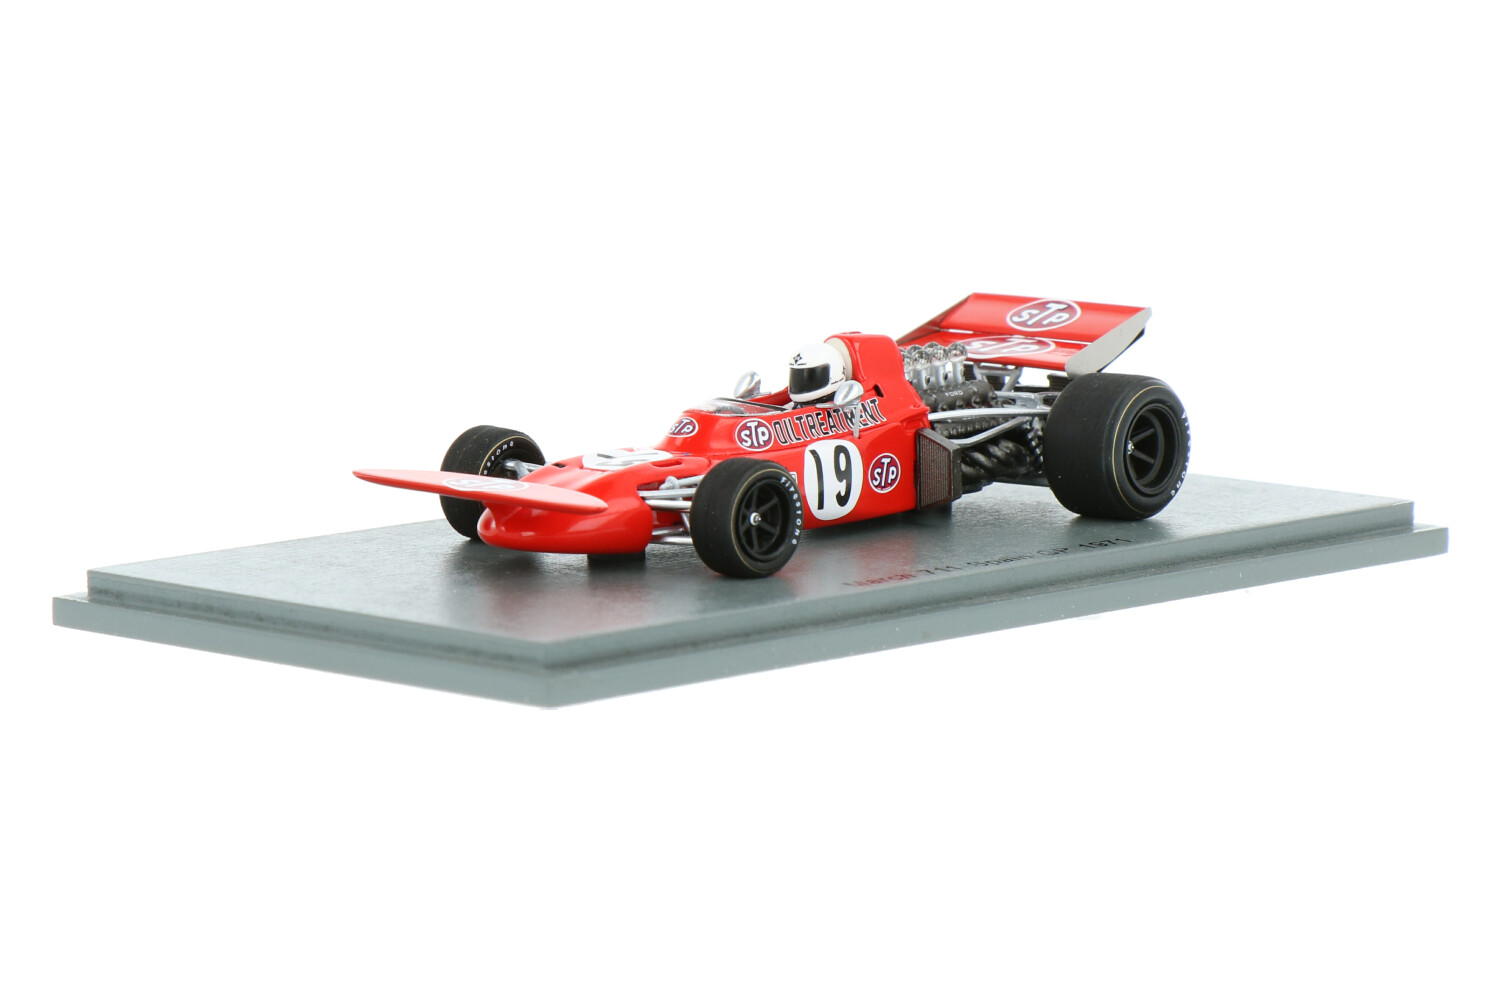 March-711-S7160_63159580006971609-Spark-March-711-S7160_Houseofmodelcars_.jpg